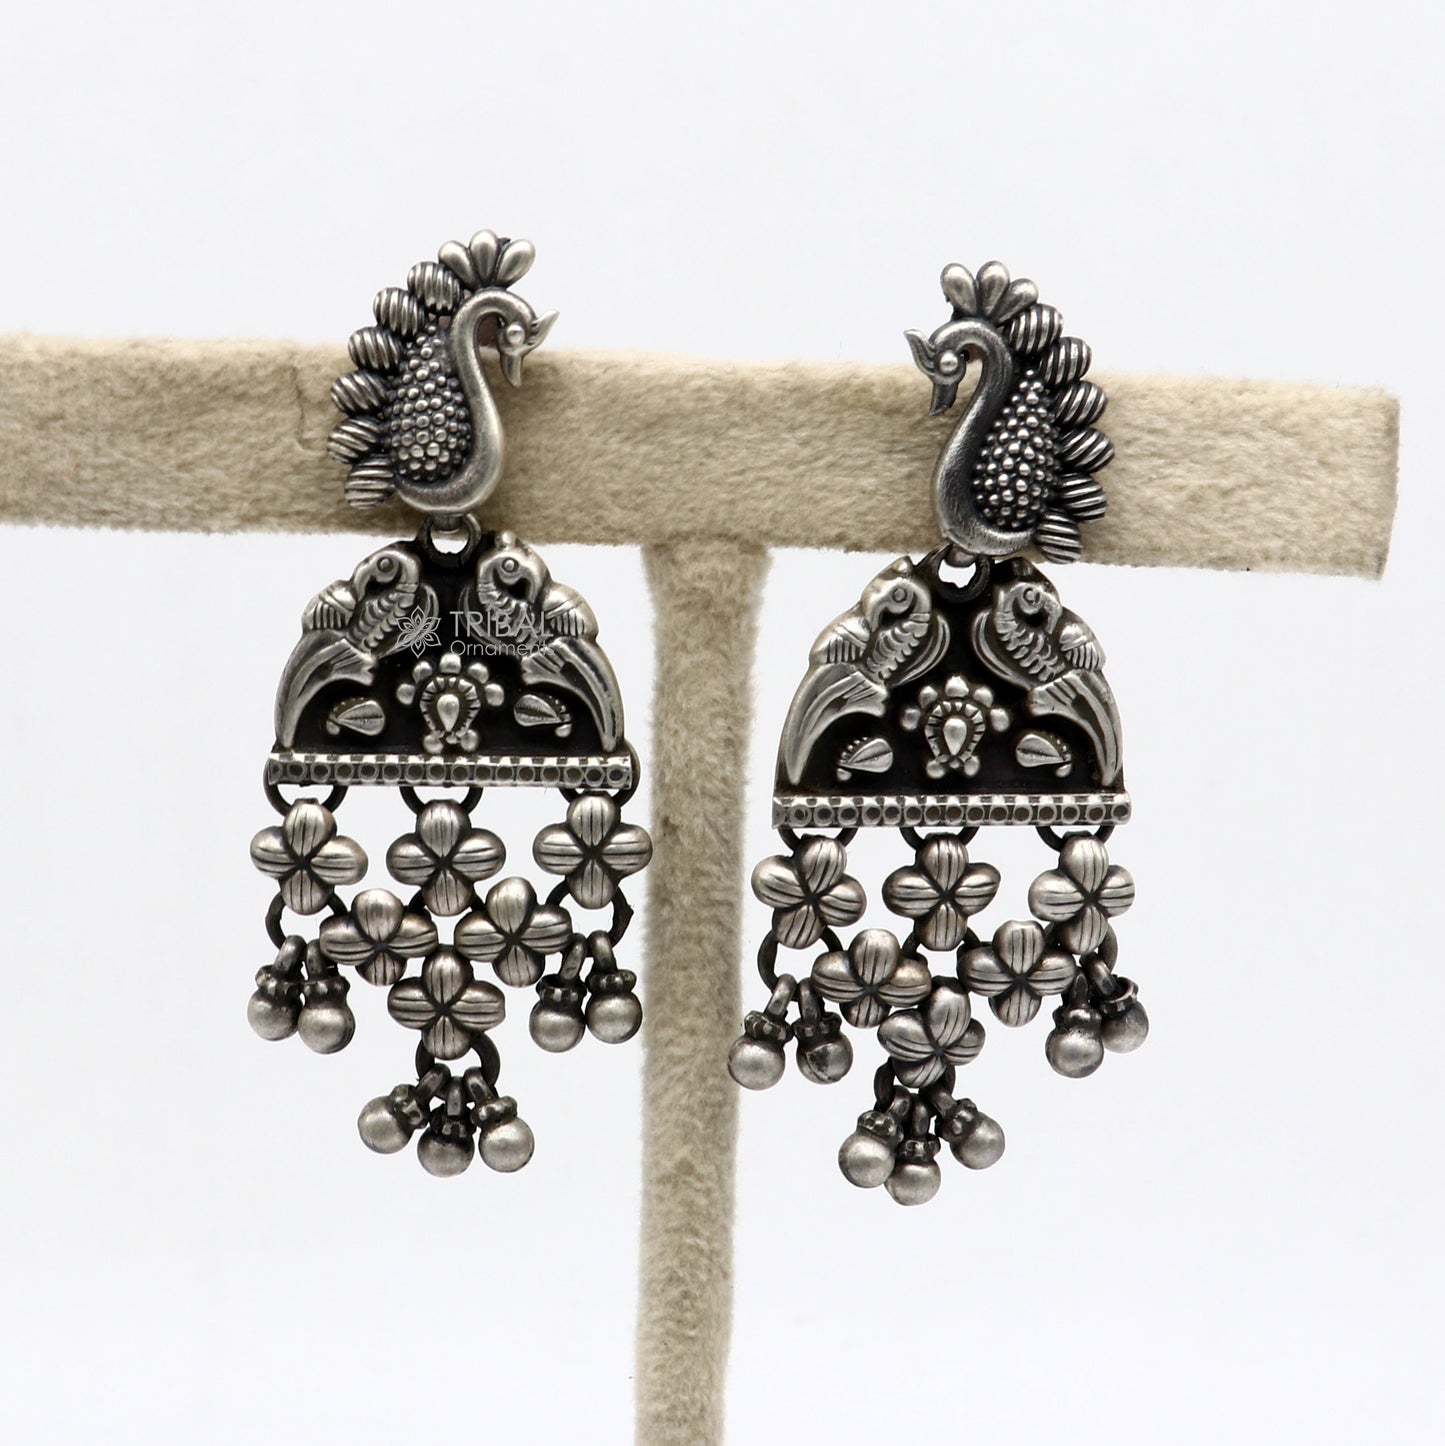 925 sterling silver handcrafted earring, stud earring, amazing peacock design drop dangle modern stylish party wear gifting earring s1228 - TRIBAL ORNAMENTS